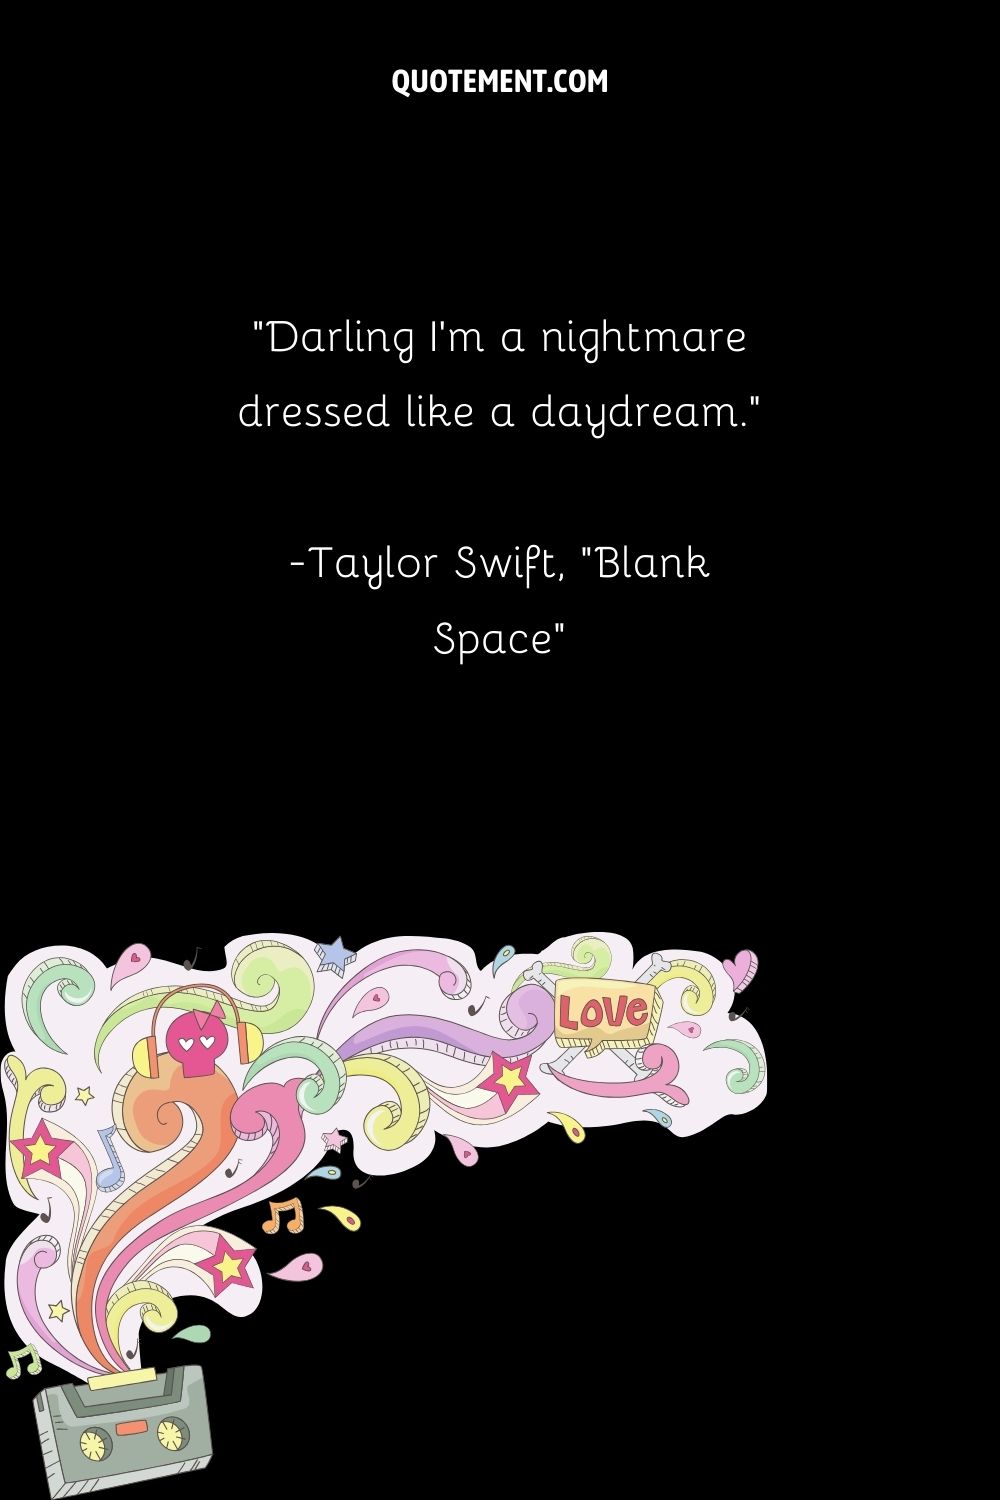 Darling I’m a nightmare dressed like a daydream. — Taylor Swift, Blank Space